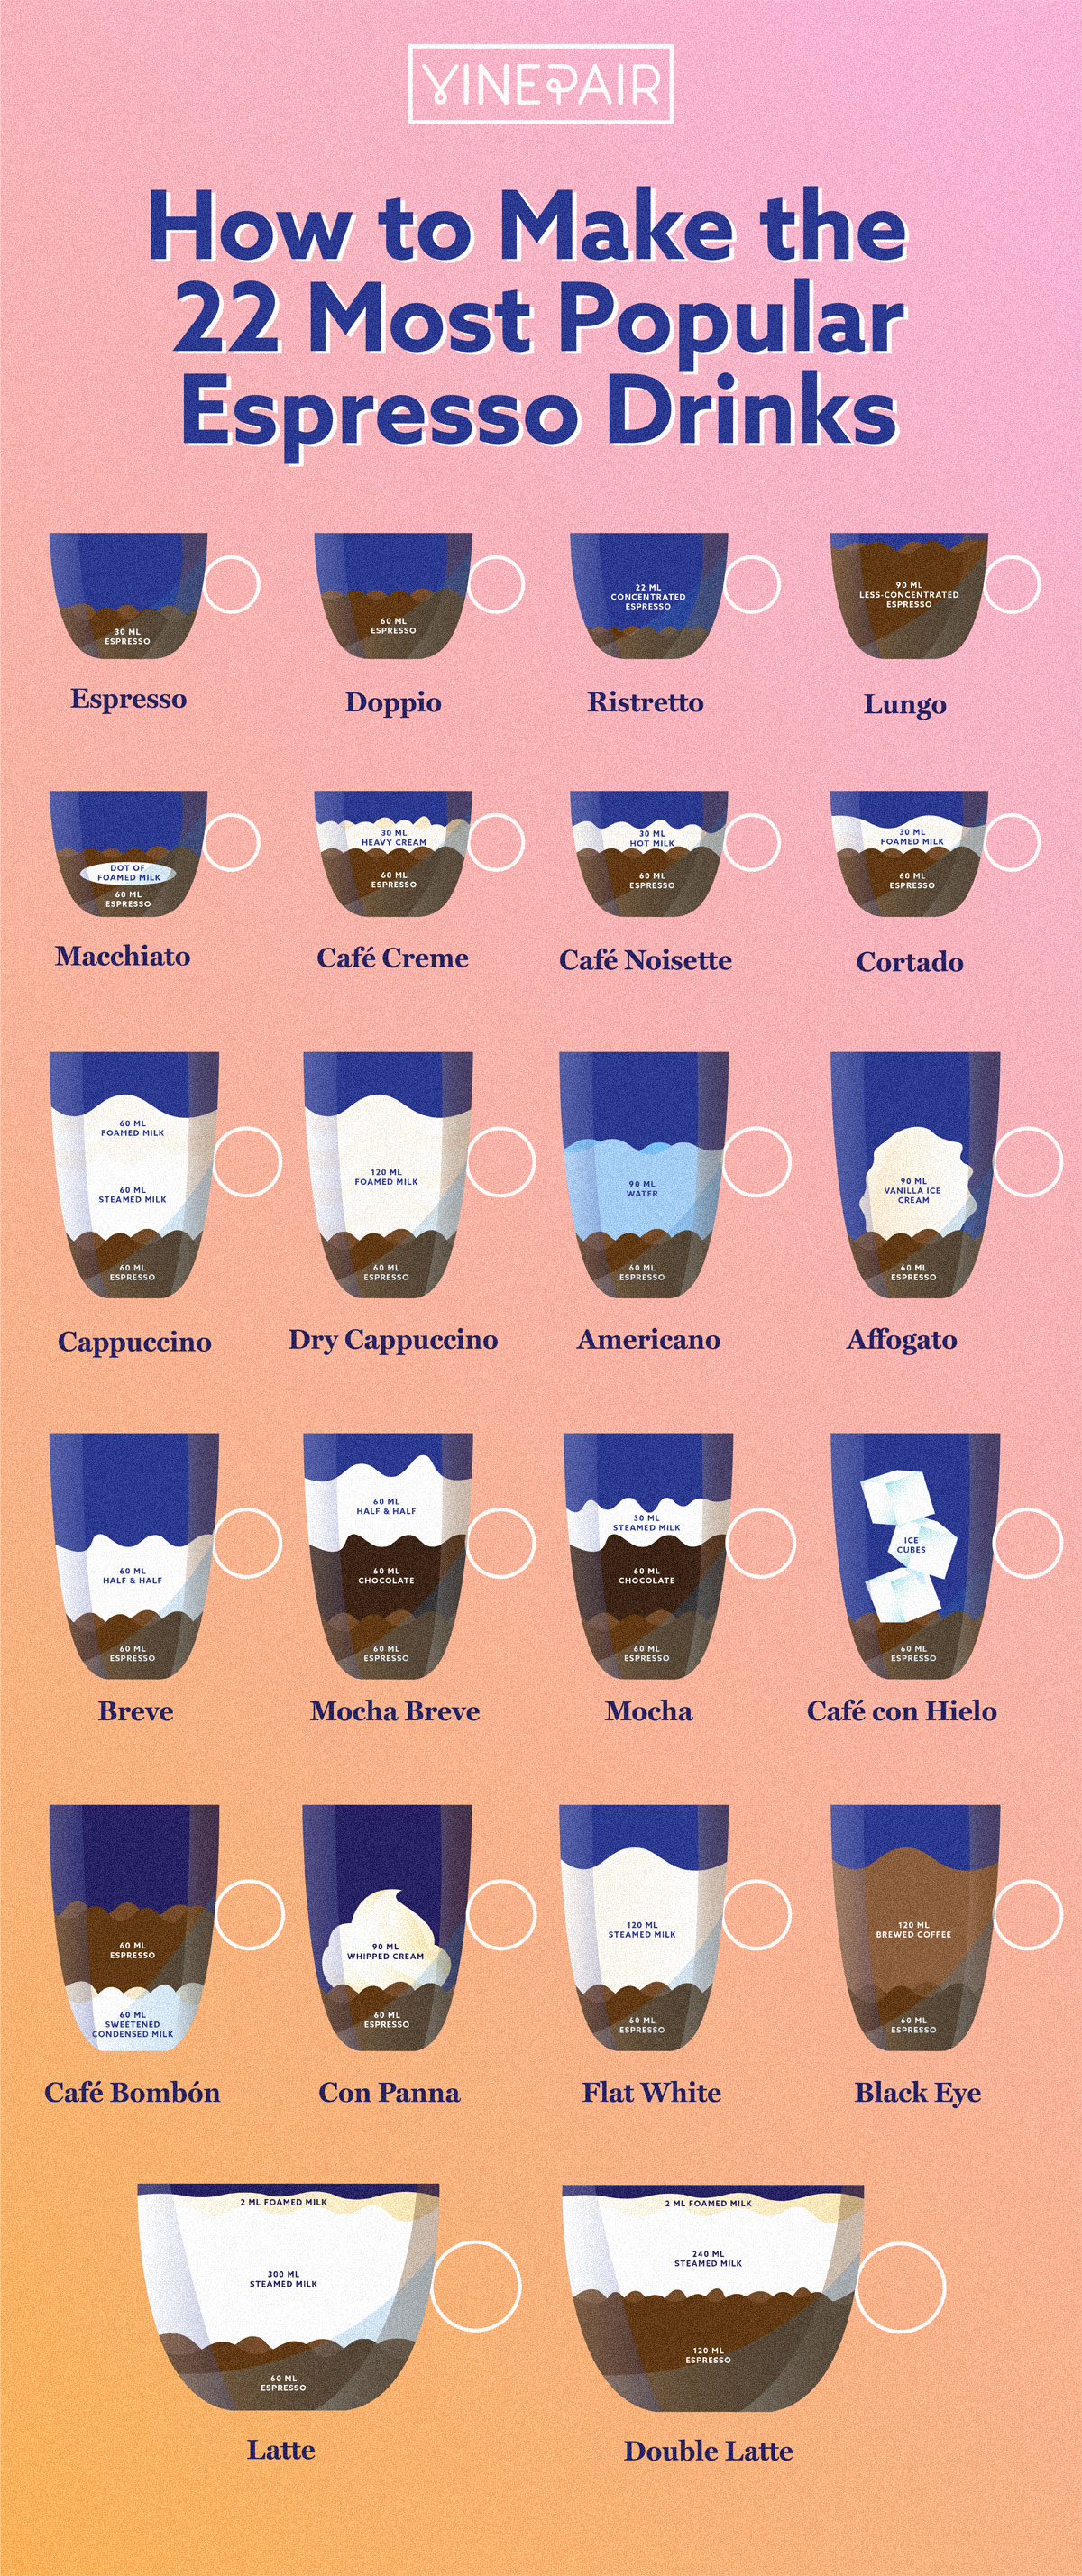 How to Make the 22 Most Popular Espresso Drinks (Infographic) VinePair